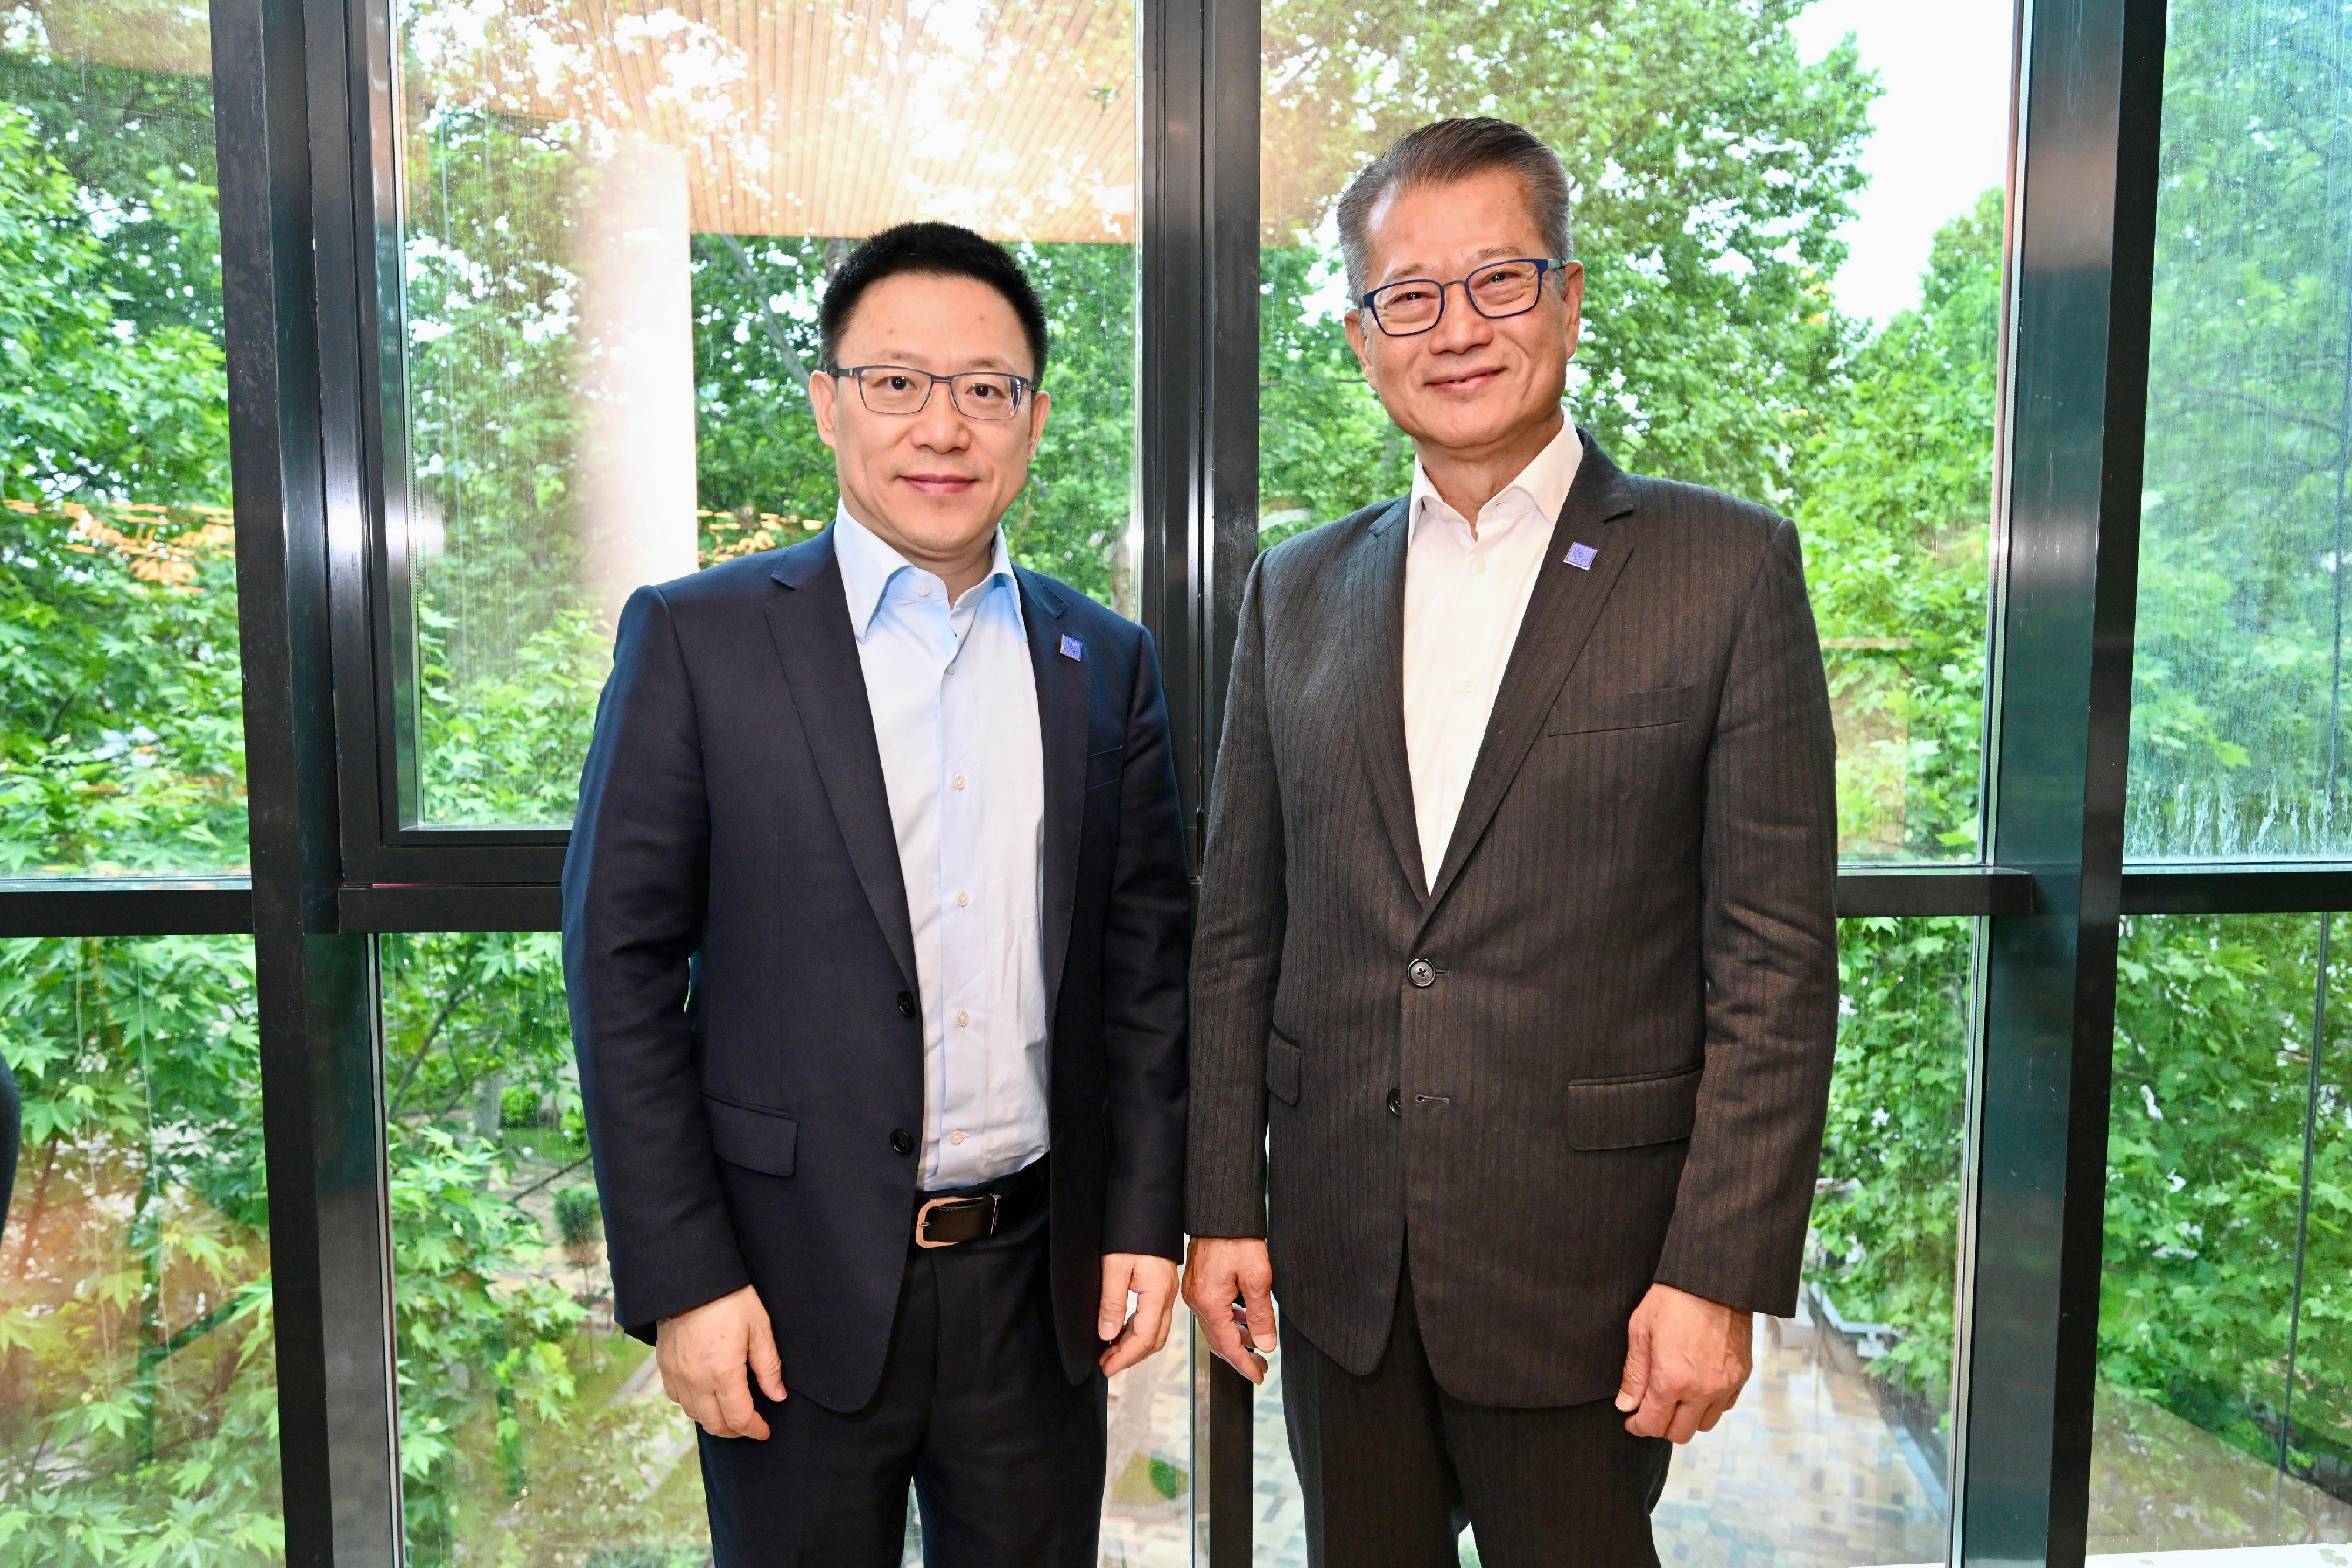 The Financial Secretary, Mr Paul Chan, continued his attendance yesterday (May 4, Tbilisi time) at the 57th Annual Meeting of the Board of Governors of the Asian Development Bank in Tbilisi, Georgia. Photo shows Mr Chan (right) meeting with Vice Minister of the Ministry of Finance, Mr Liao Min (left).